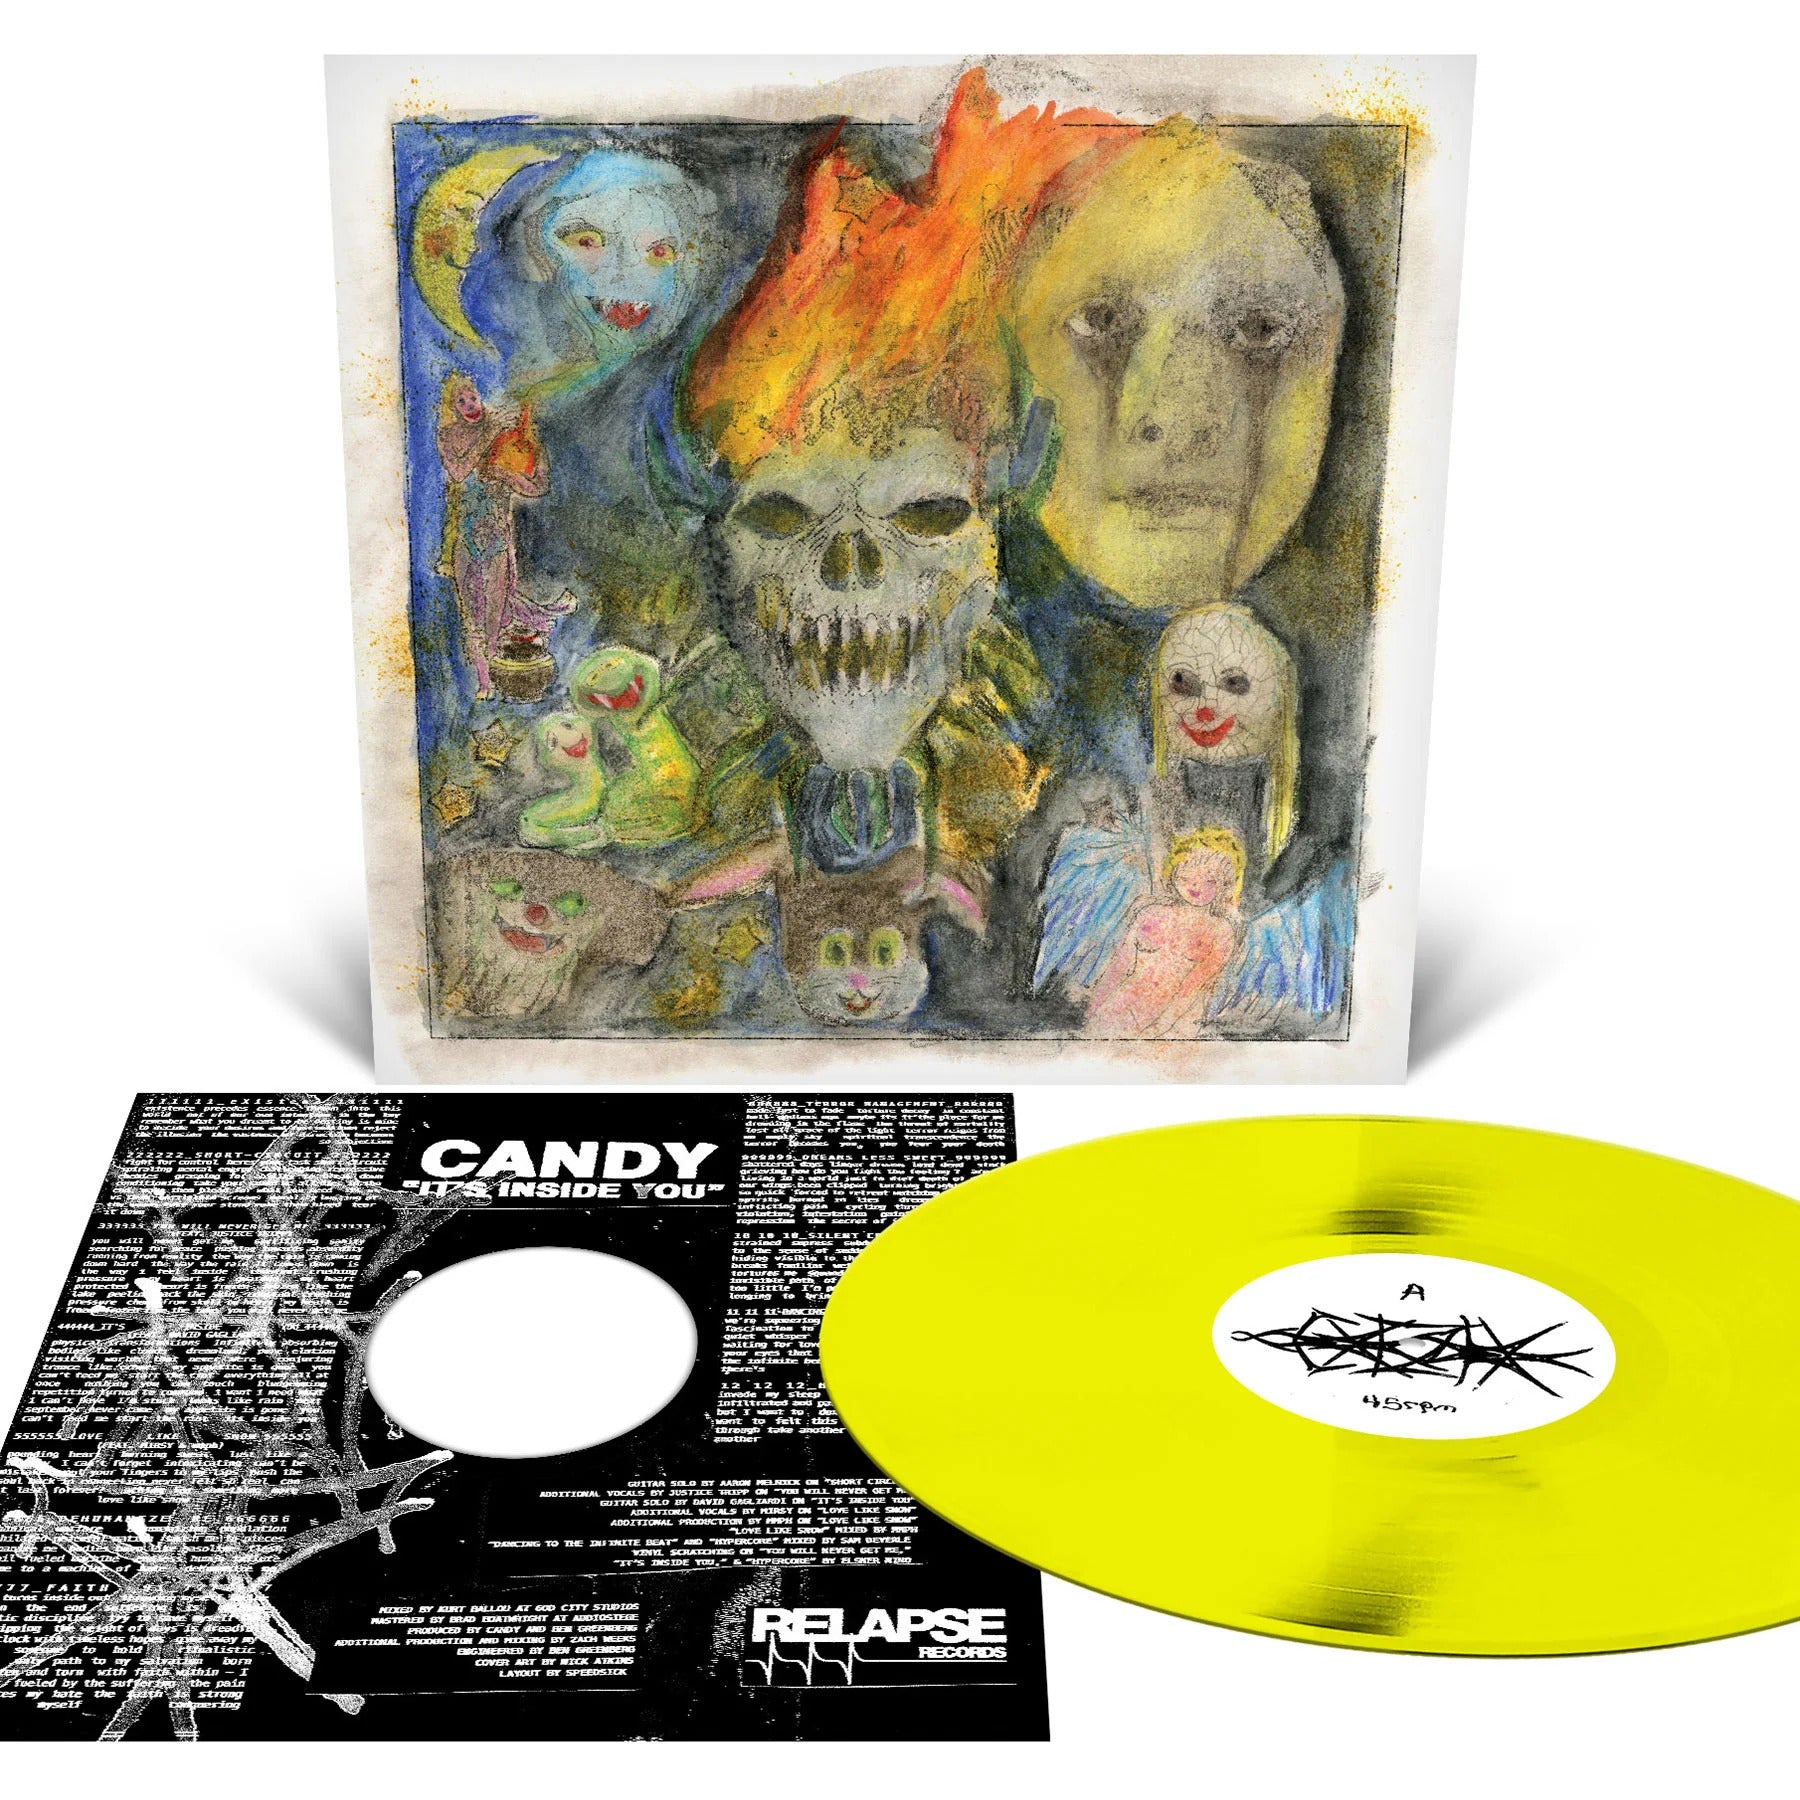 Candy "It's Inside You" Yellow Vinyl